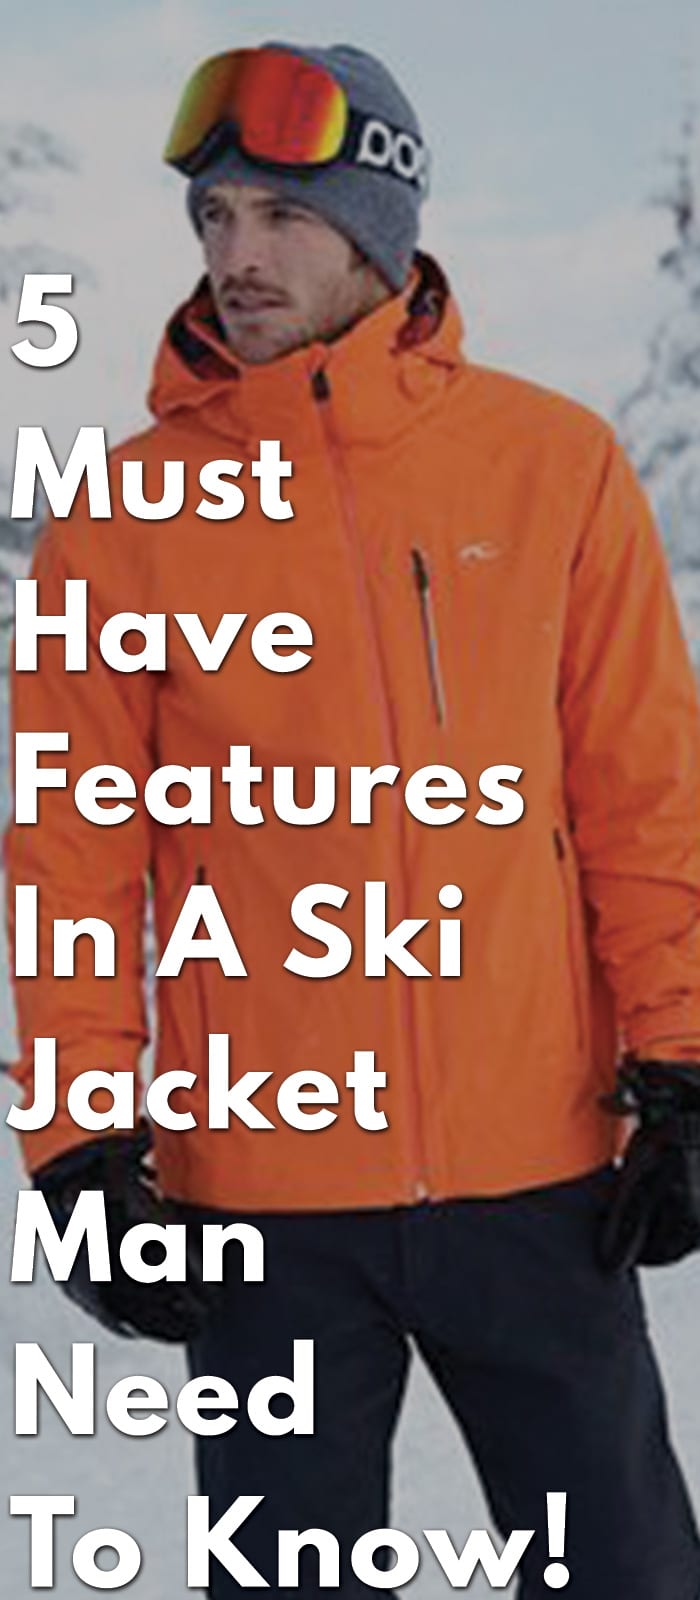 5-Must-Have-Features-In-A-Ski-Jacket-Man-Need-To-Know!